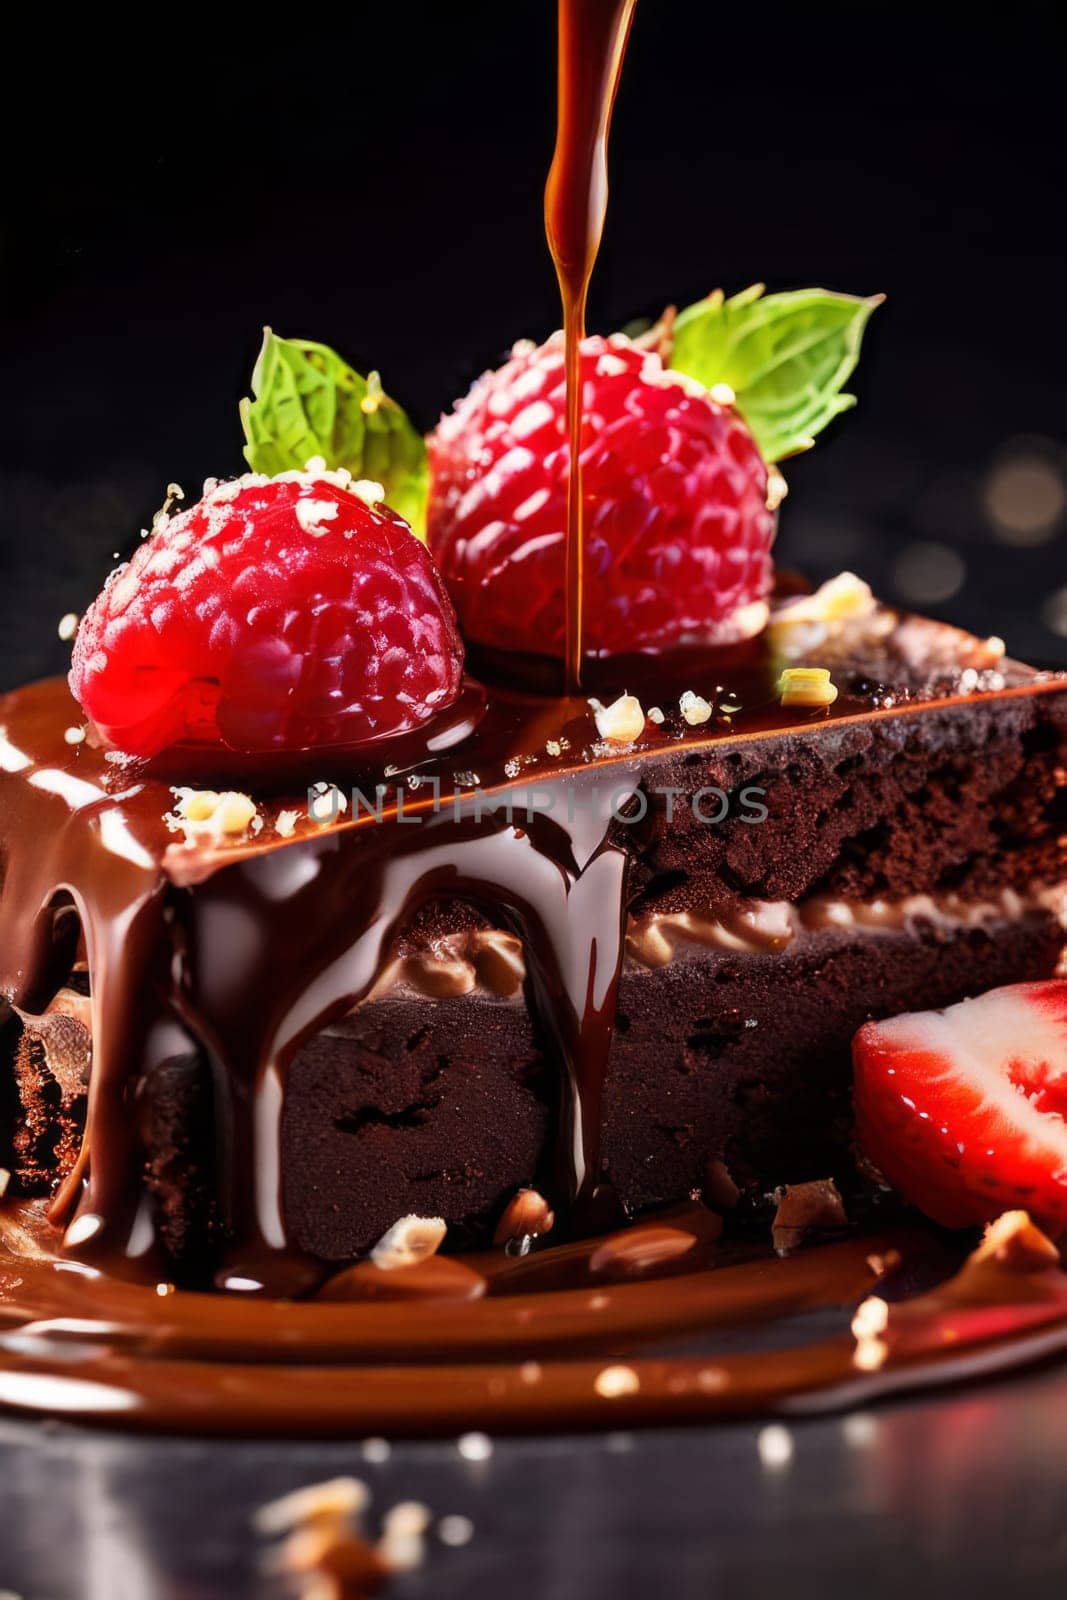 Decadent chocolate cake adorned with fresh strawberries, crunchy nuts, elegantly presented on plate. For restaurant websites, cafe, bakery menus, food blogs, magazines, food, home baking inspiration. by Angelsmoon